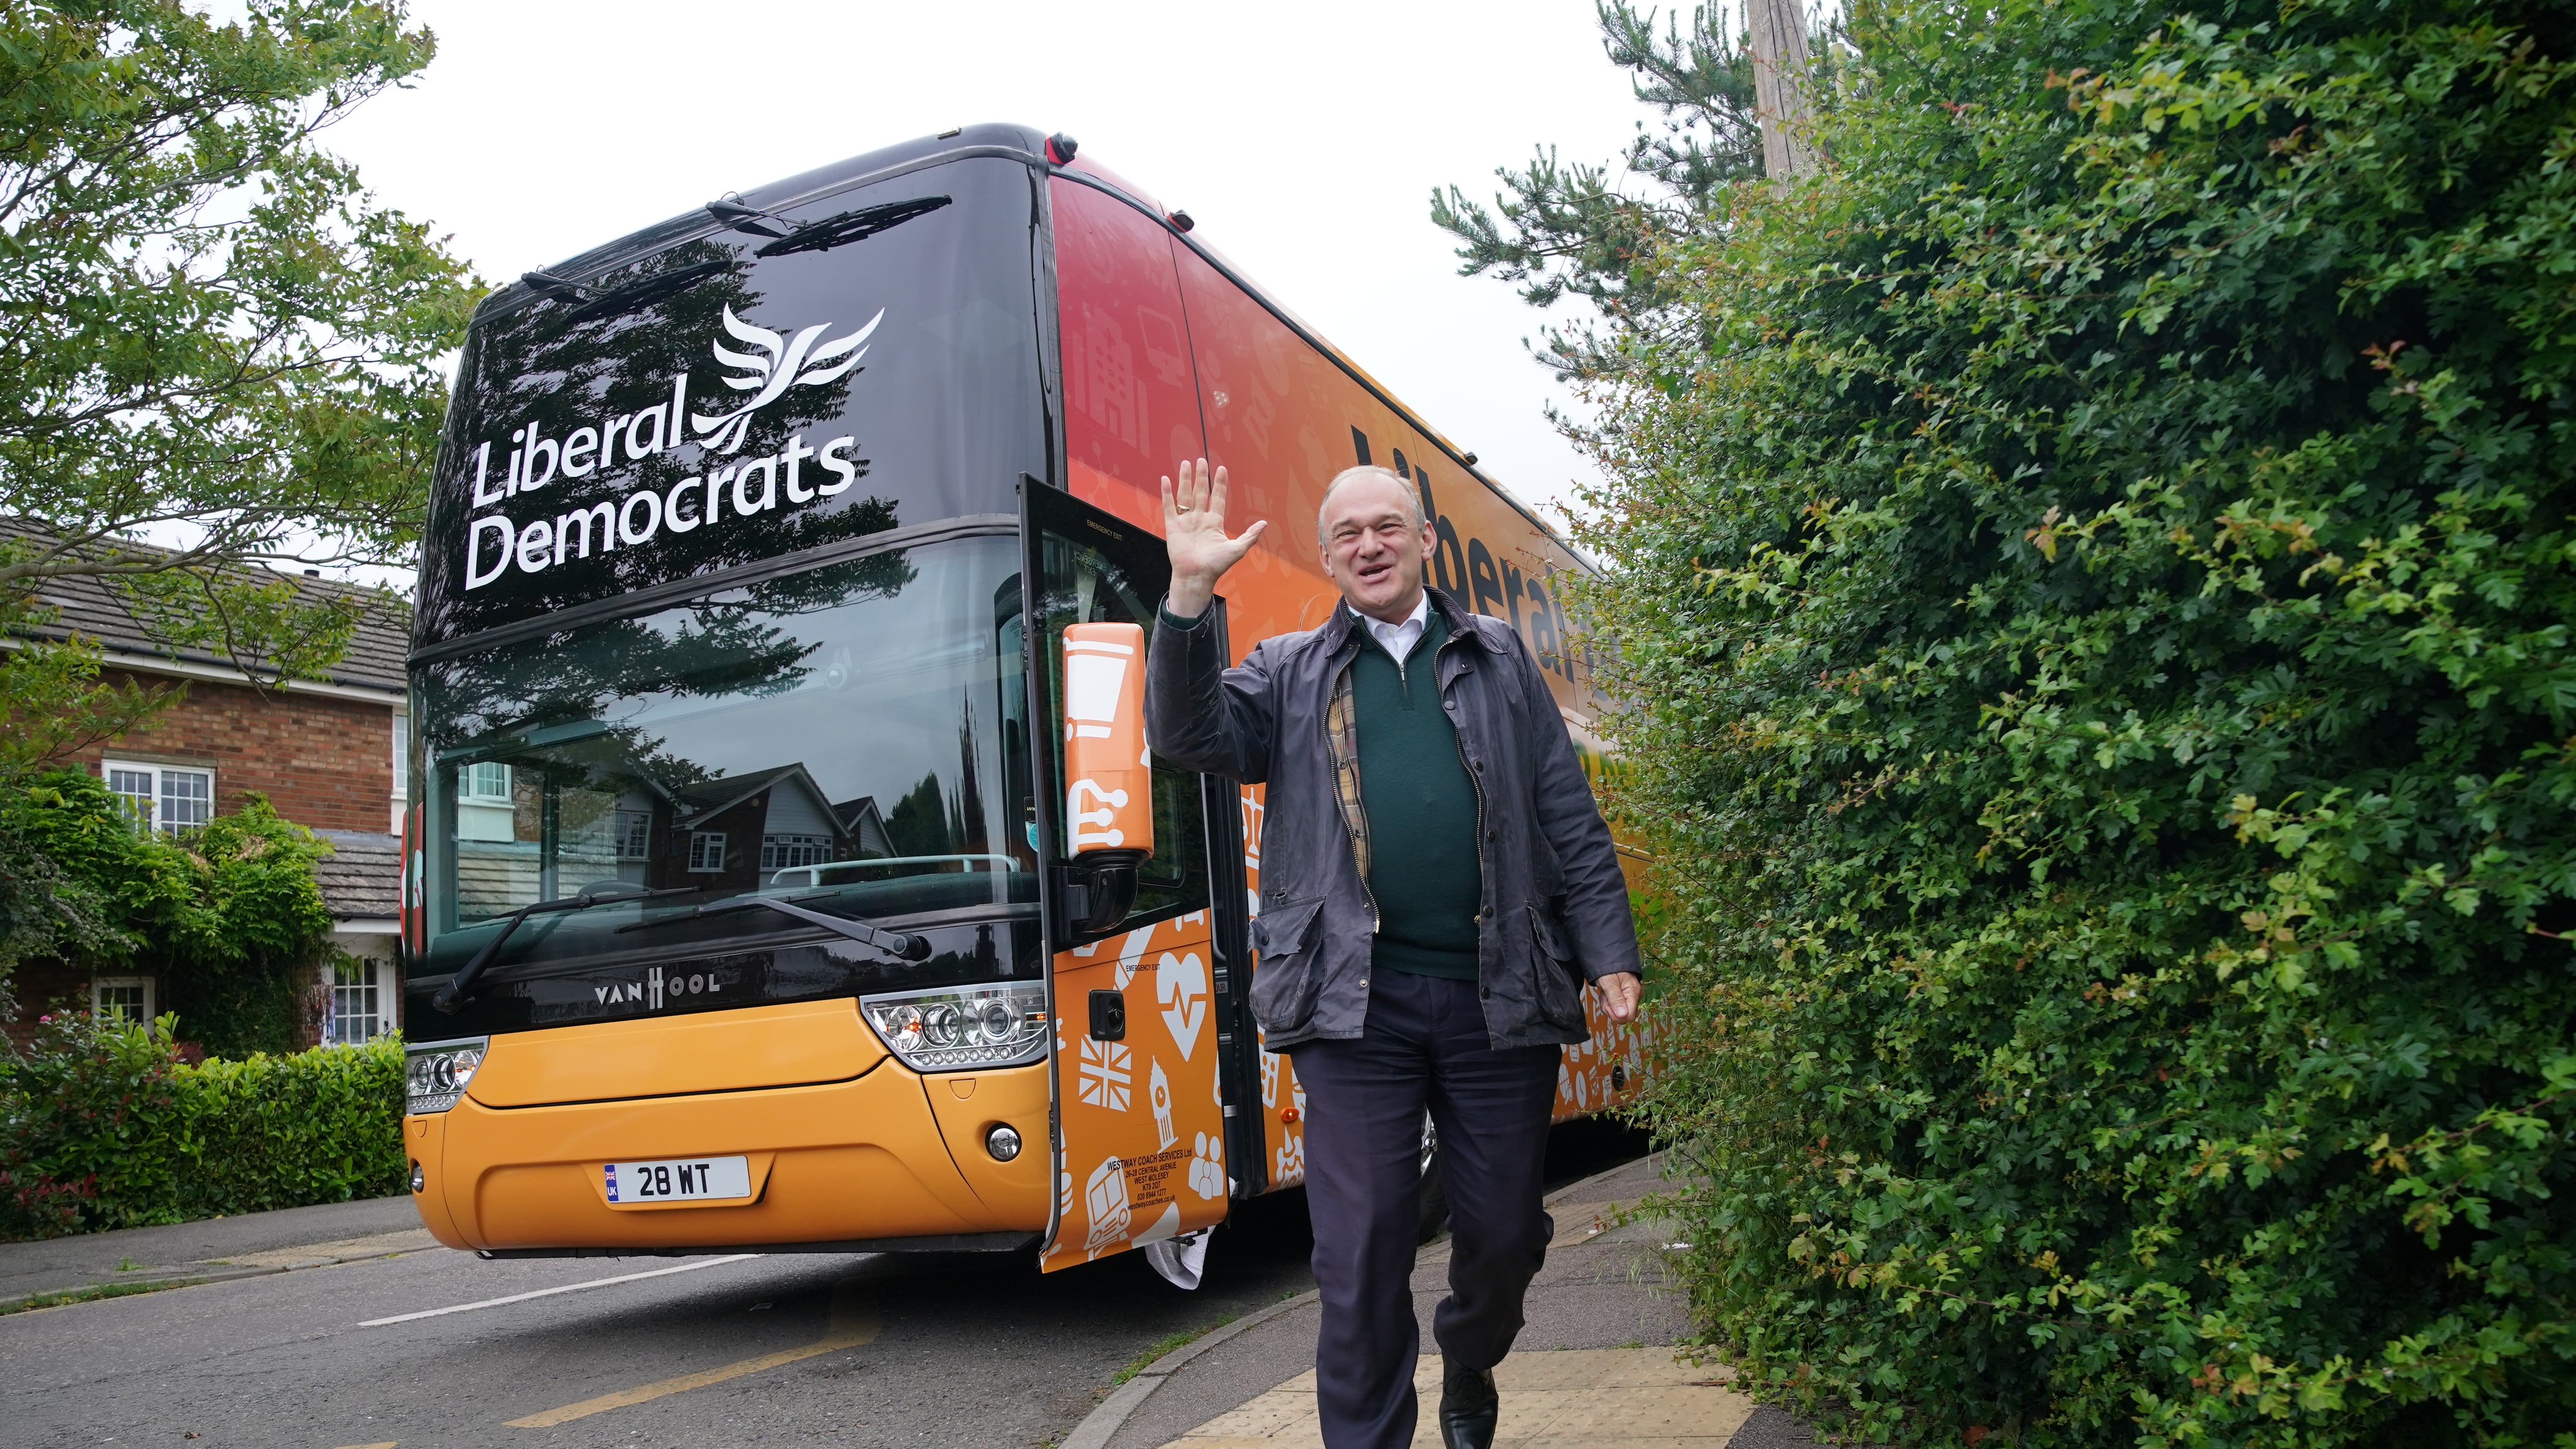 Liberal Democrats leader Sir Ed Davey said there was no limit to his ambition for the party